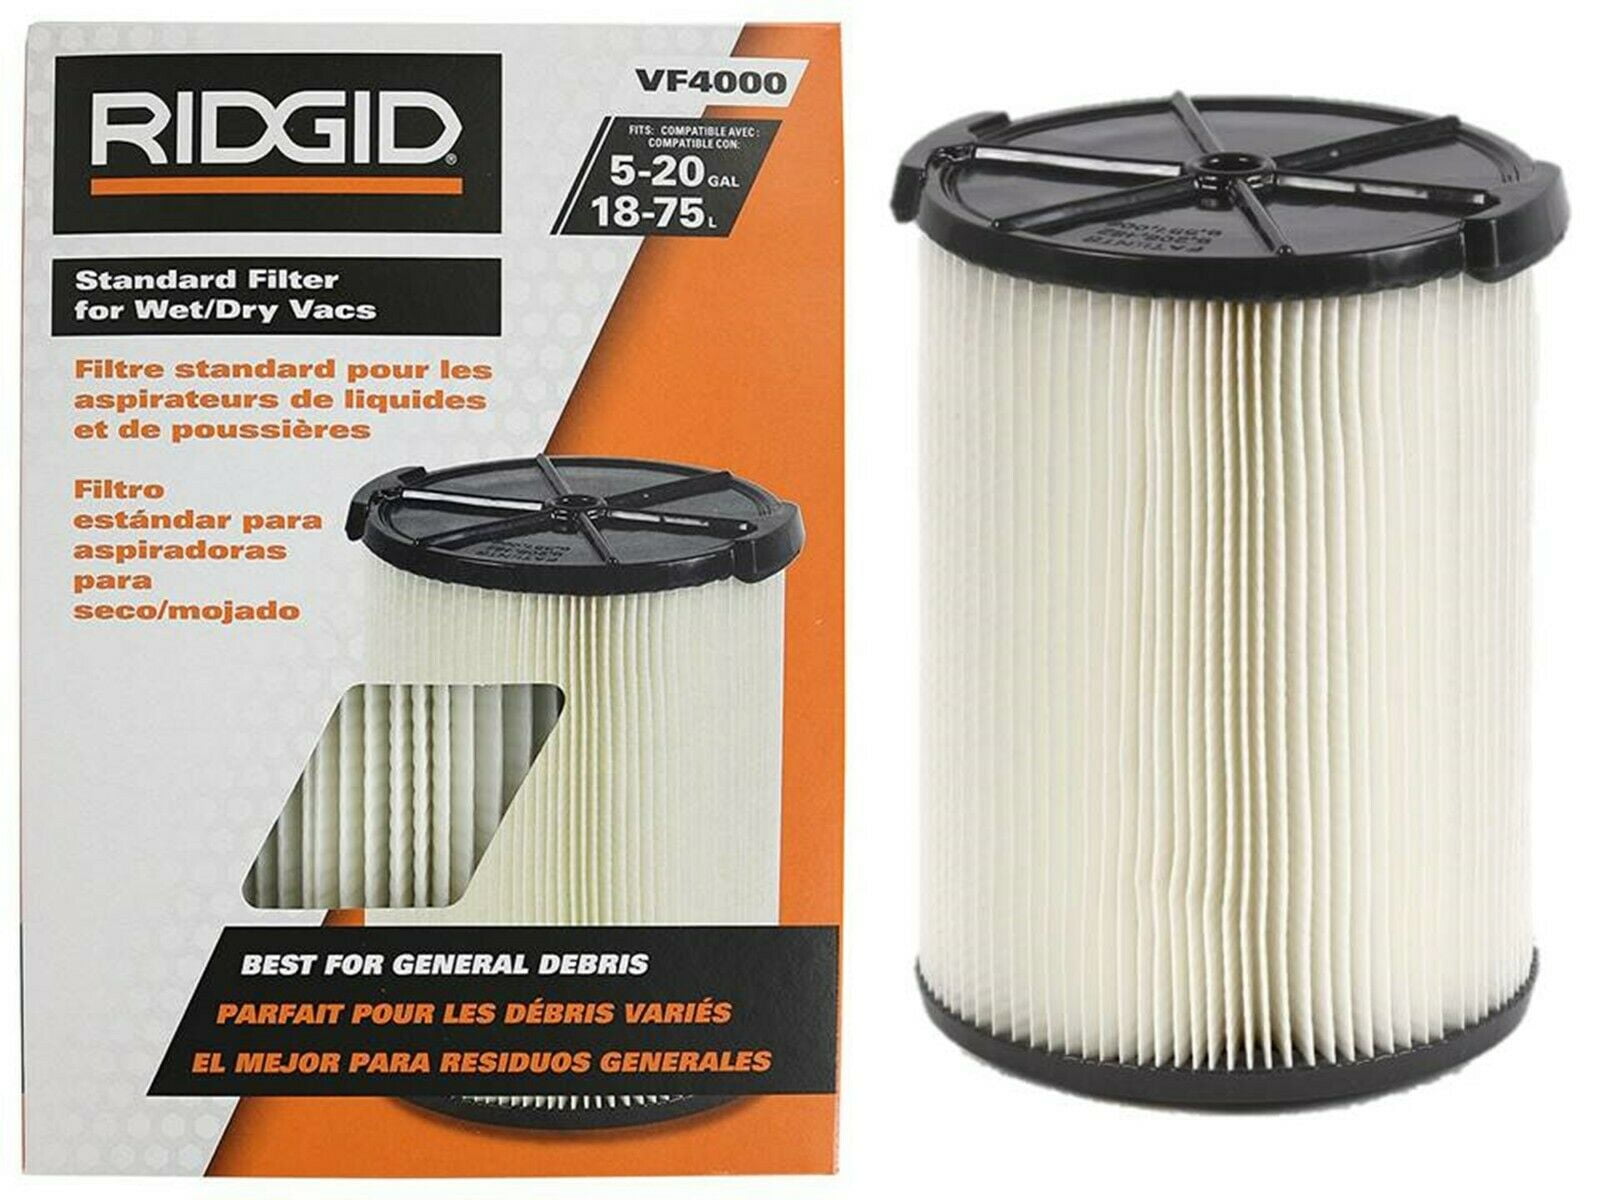 Details about   VF3500 VF4000 VF5000 9-17816 Replacement Filter For RIDGID Wet/Dry Vacuum Shop 